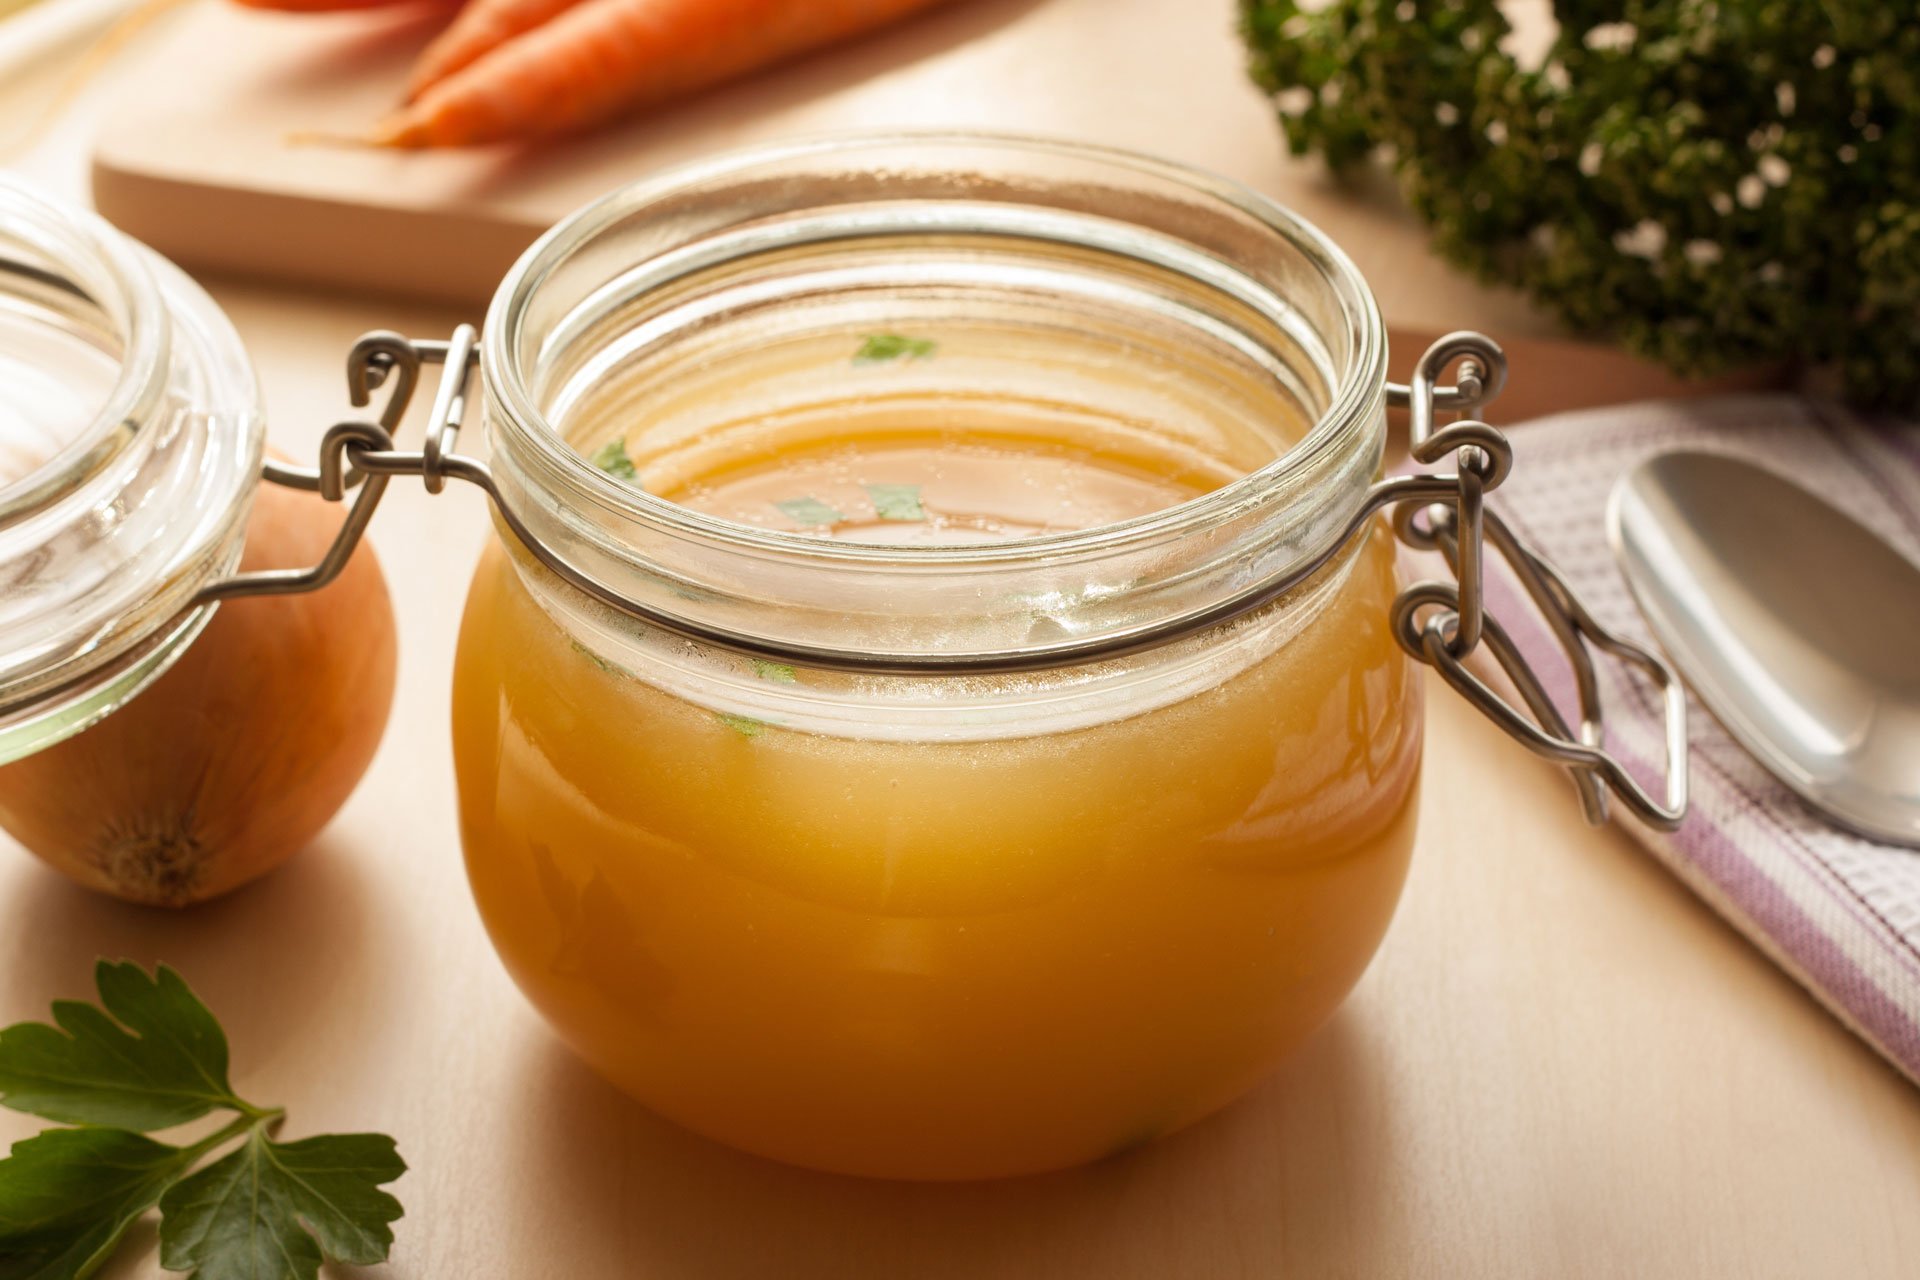 Bone broth made from chicken in a glass jar